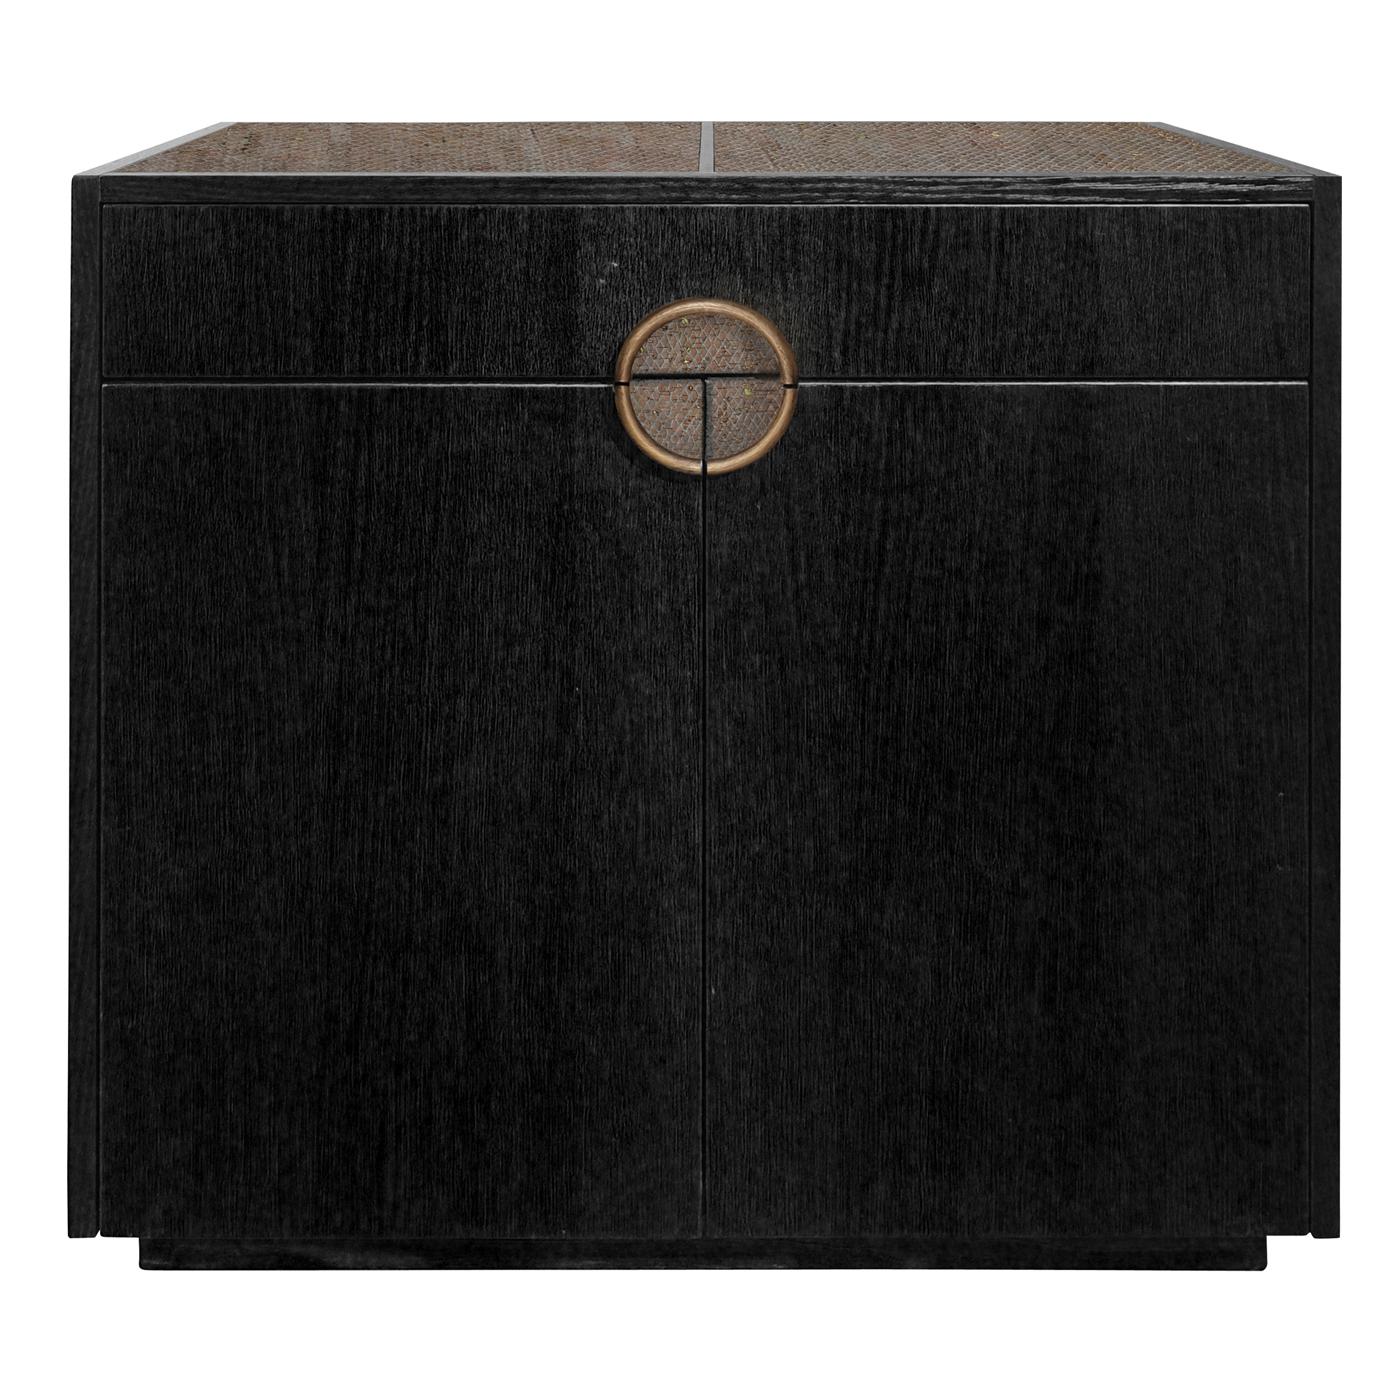 This sturdy yet elegant cabinet is an example of functional and refined craftsmanship. Fashioned of matte black stained oak, it comprises two doors and one top drawer. The ring-shaped handle and the top (divided into removable sections) are